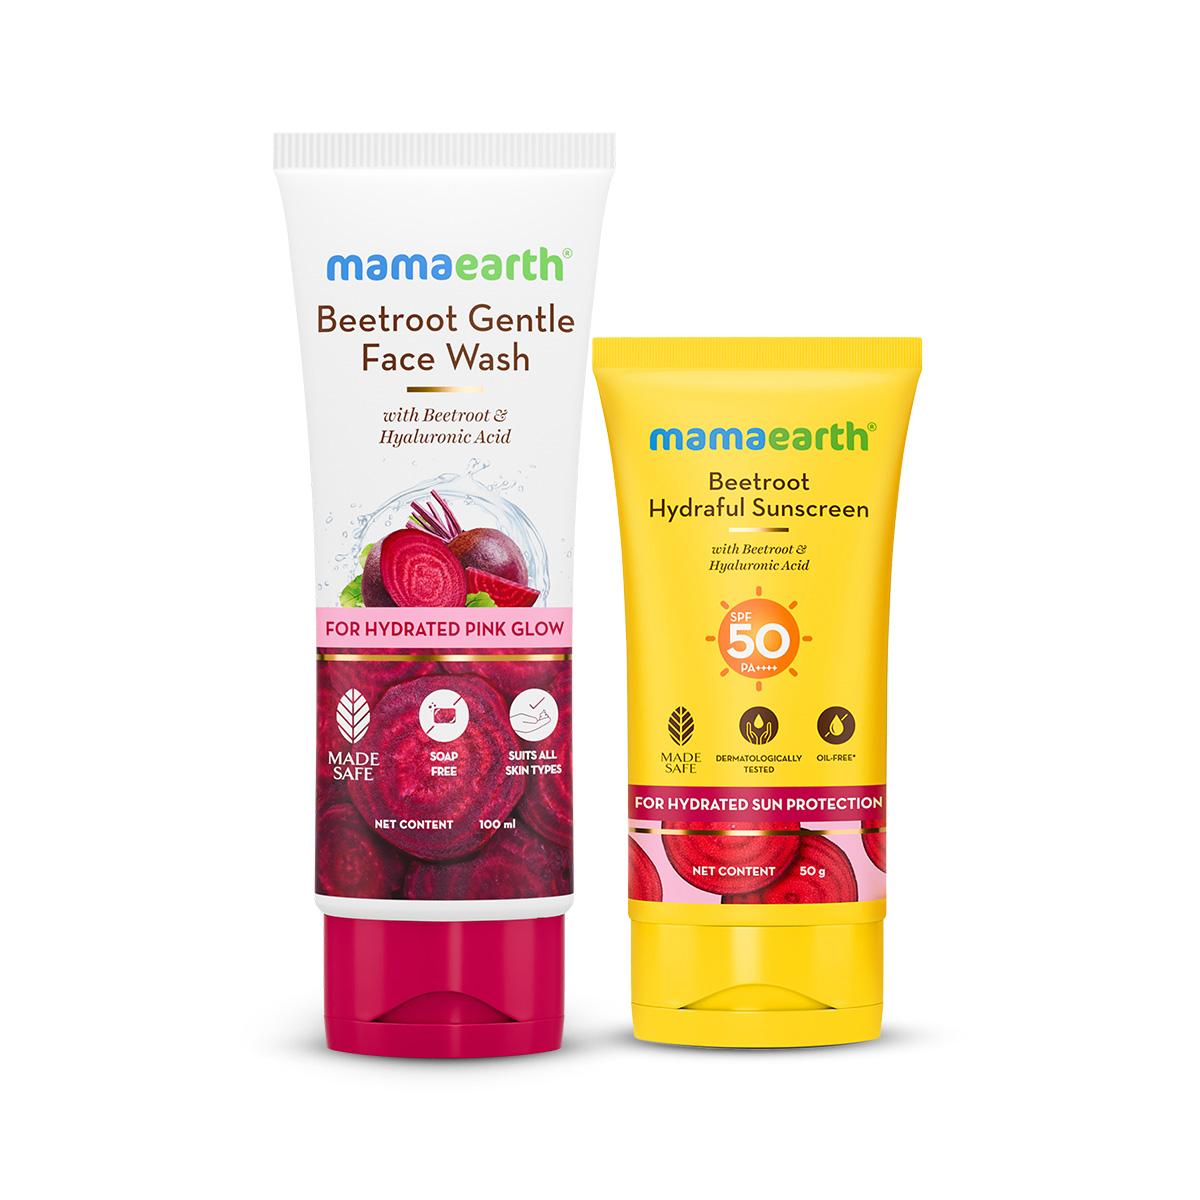 beetroot cleanse & protect combo